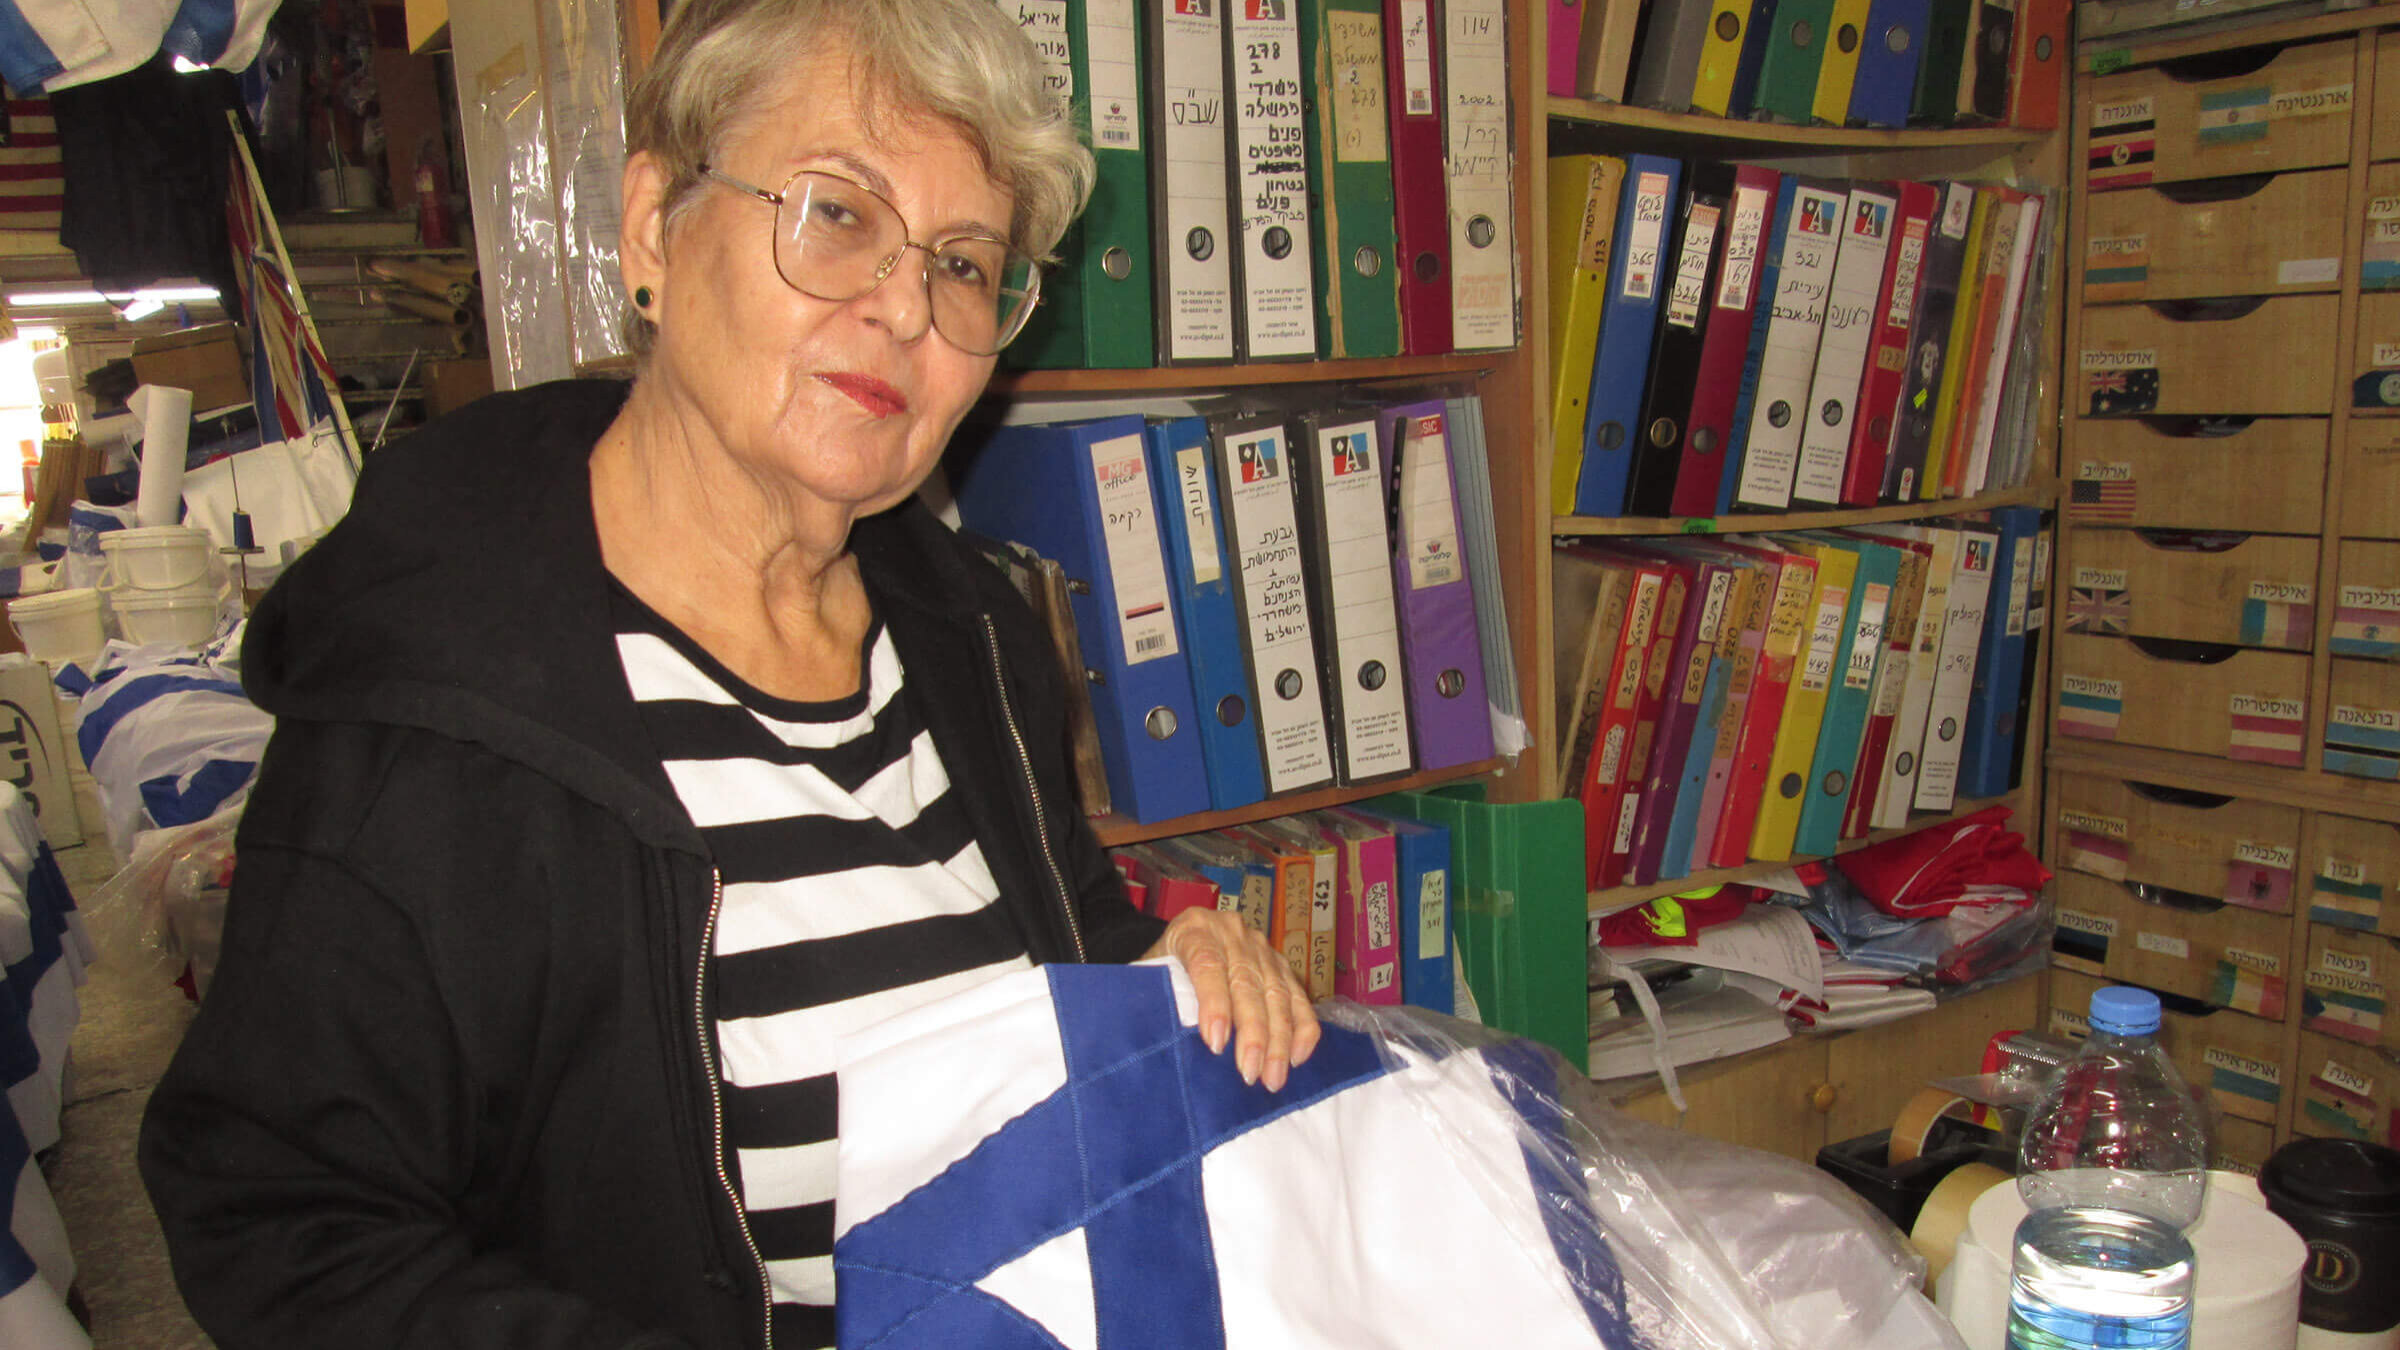 Hadassah Berman, the 75-year-old daughter-in-law of company's founders, holds a flag whose Star of David is hand-sewn onto the fabric. 